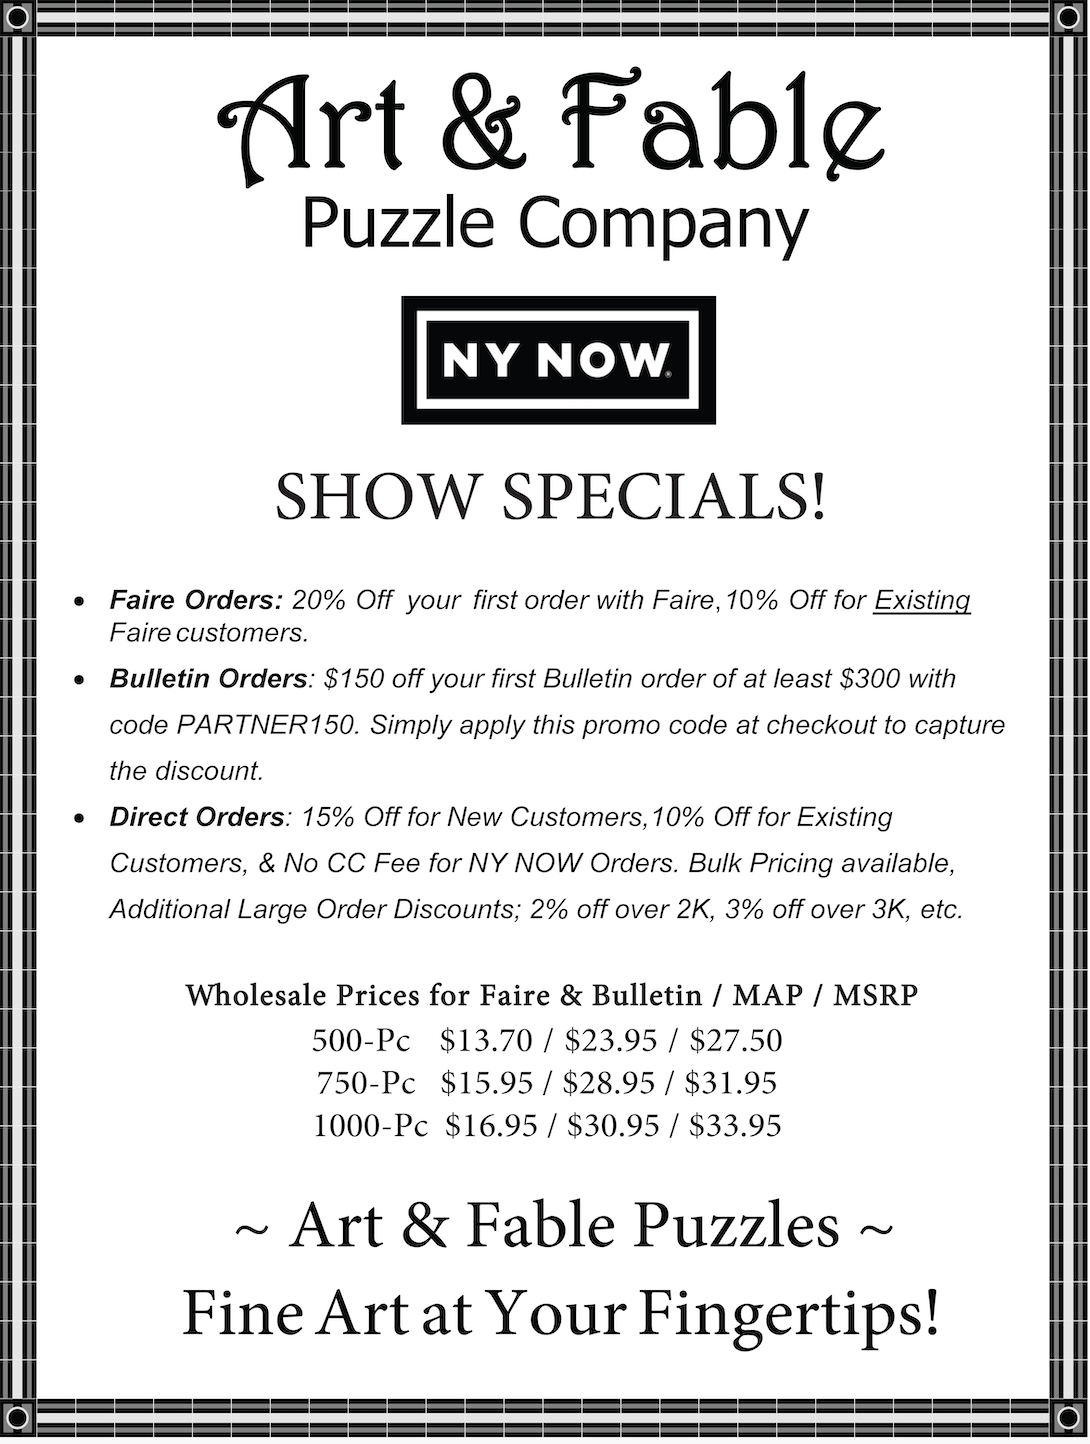 Order Direct from Art & Fable Puzzle Company! 5332